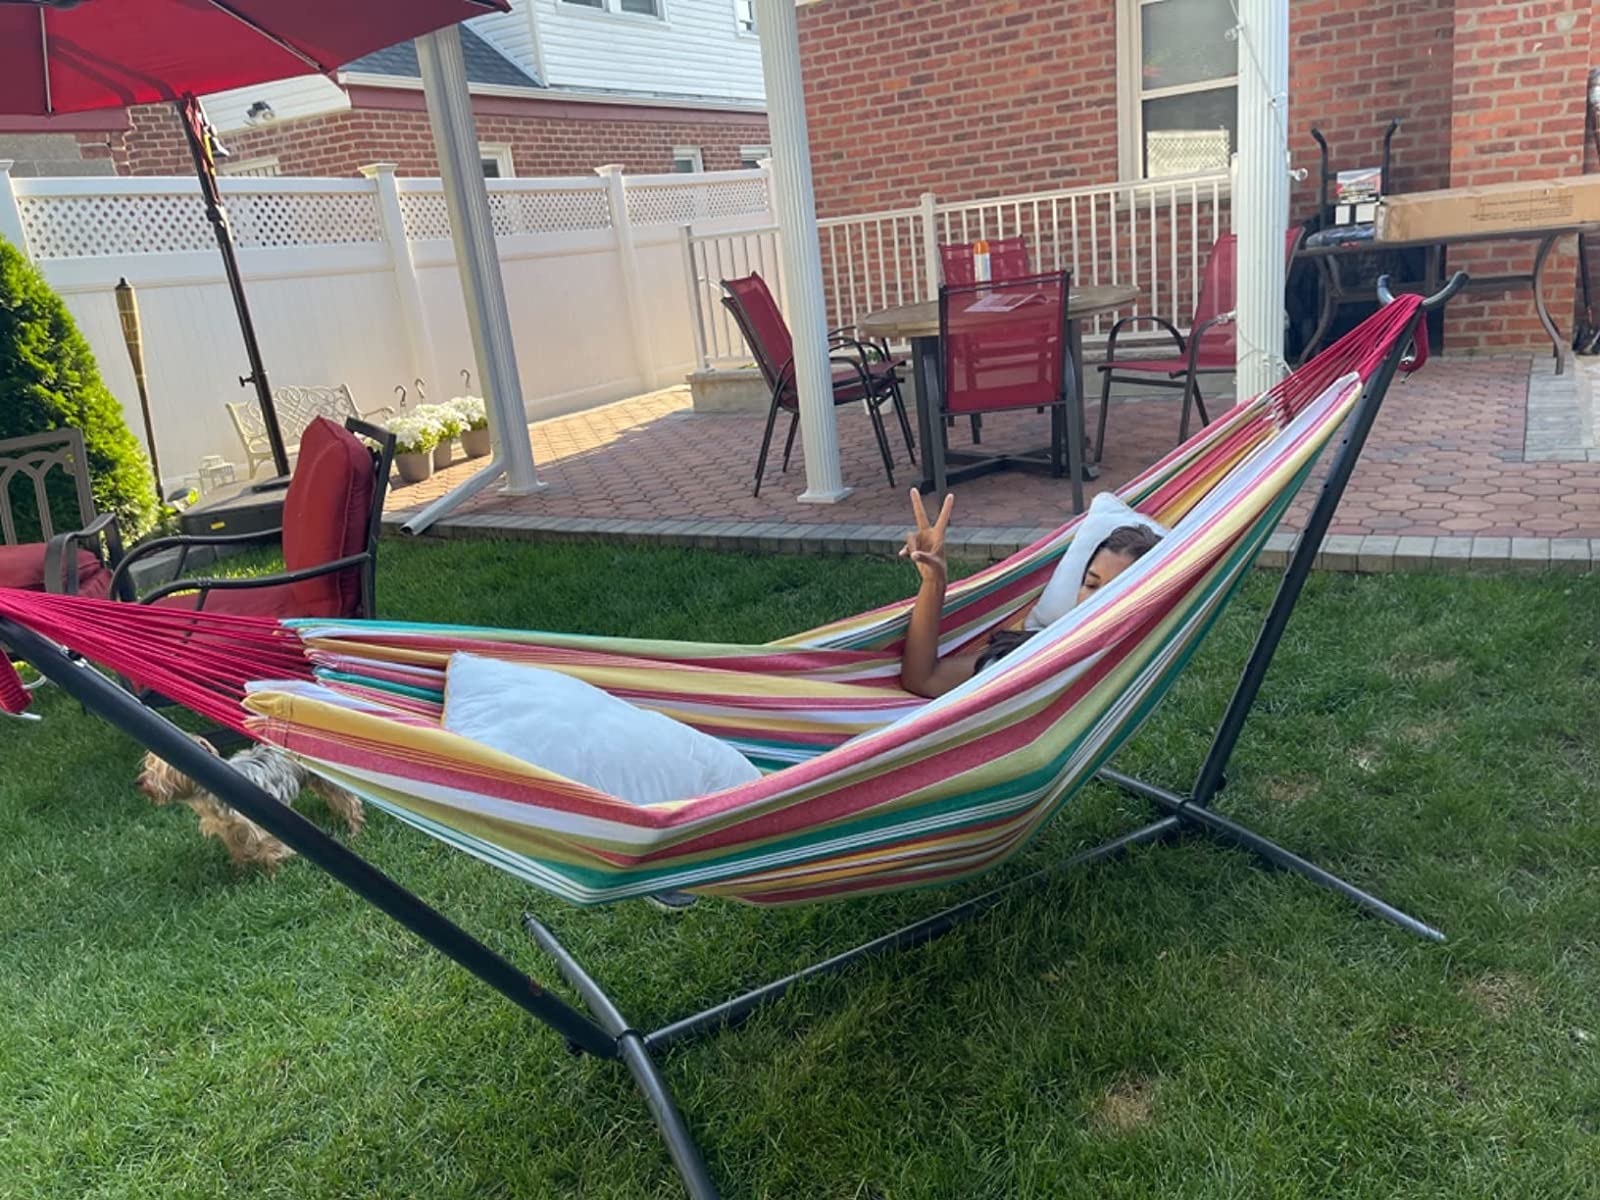 Reviewer image of the hammock in their backyard